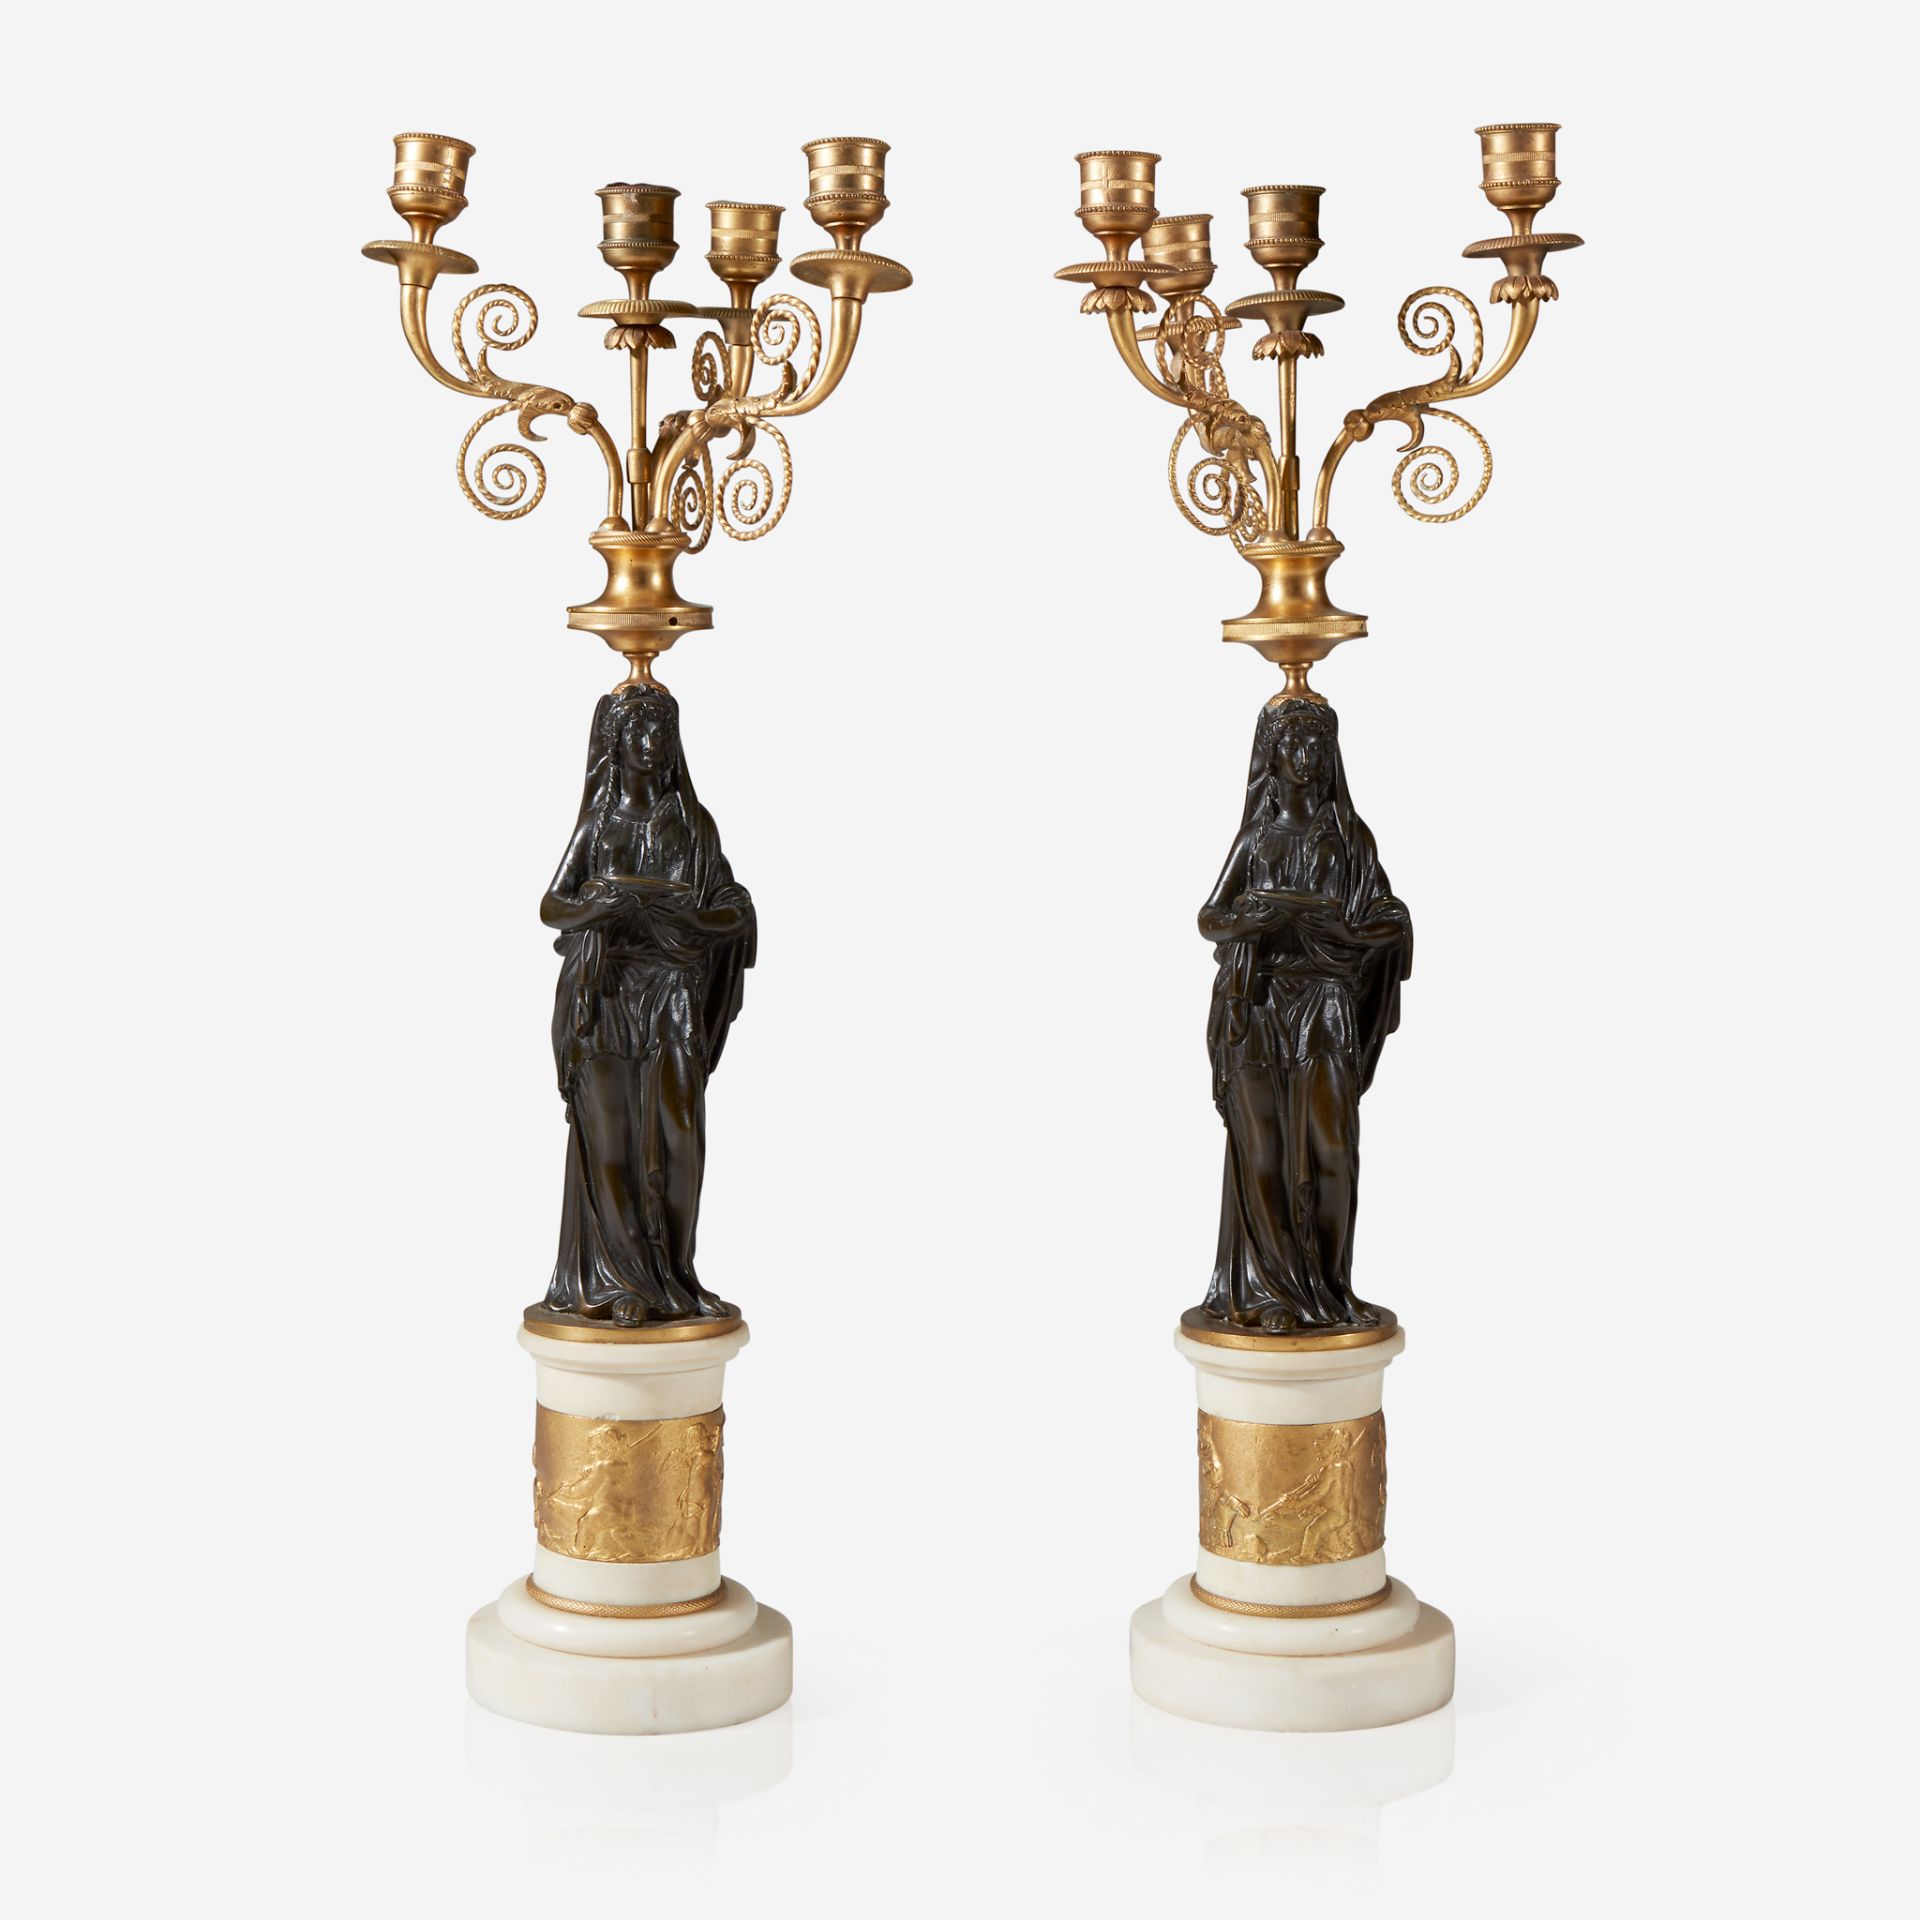 A pair of Empire gilt and patinated bronze and white marble figural four-light candelabra, First qua